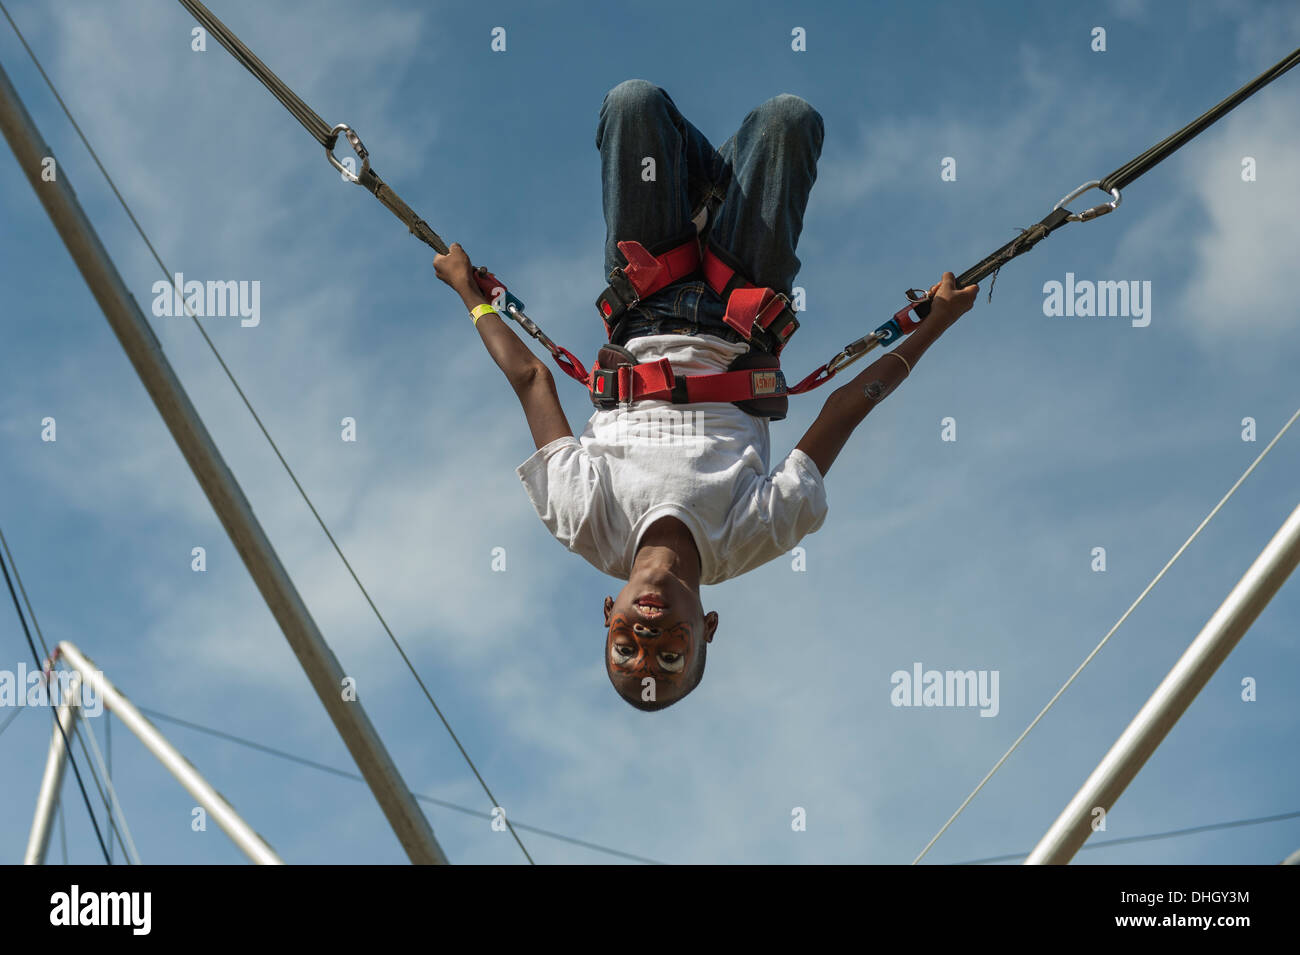 A child swinging on stretchy cords at a local park in Central Florida Stock Photo